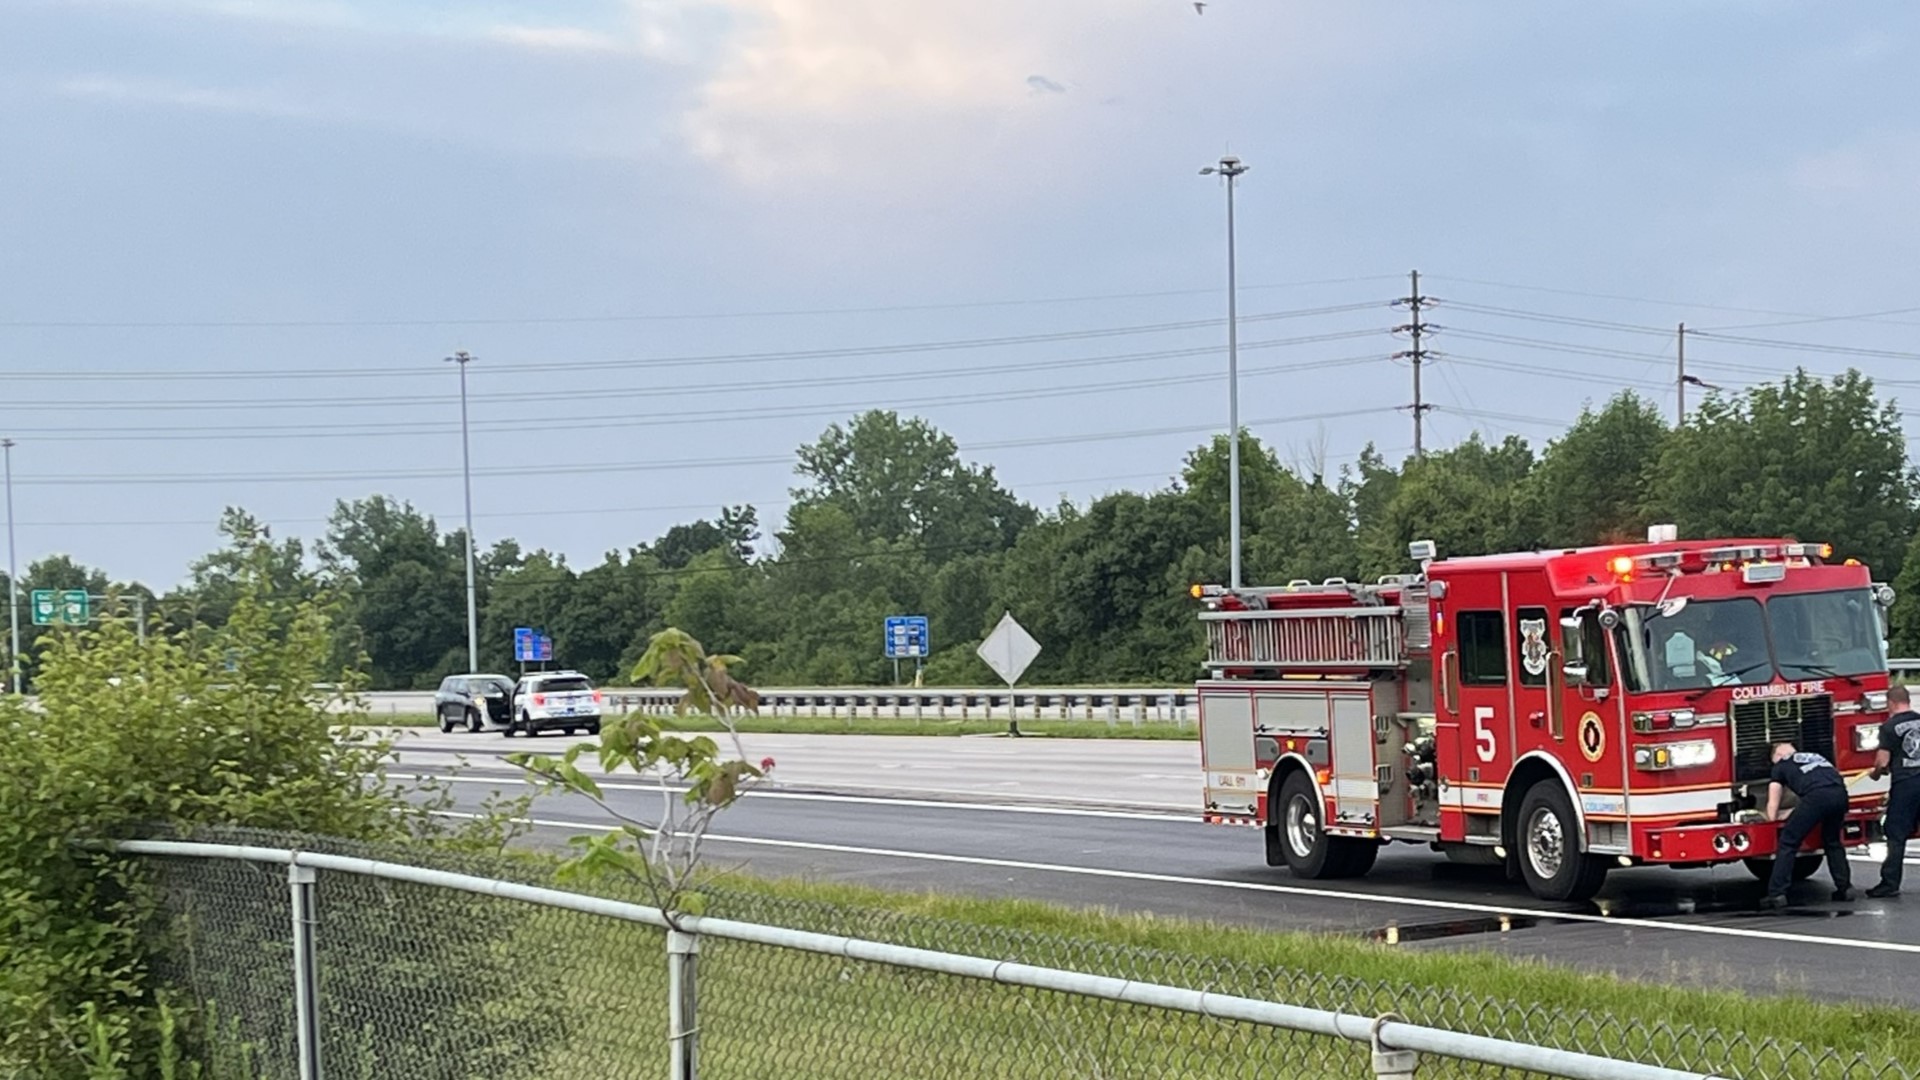 Police said all northbound lanes of I-270 between East Broad Street and North Hamilton Avenue were closed for several hours following the crash.